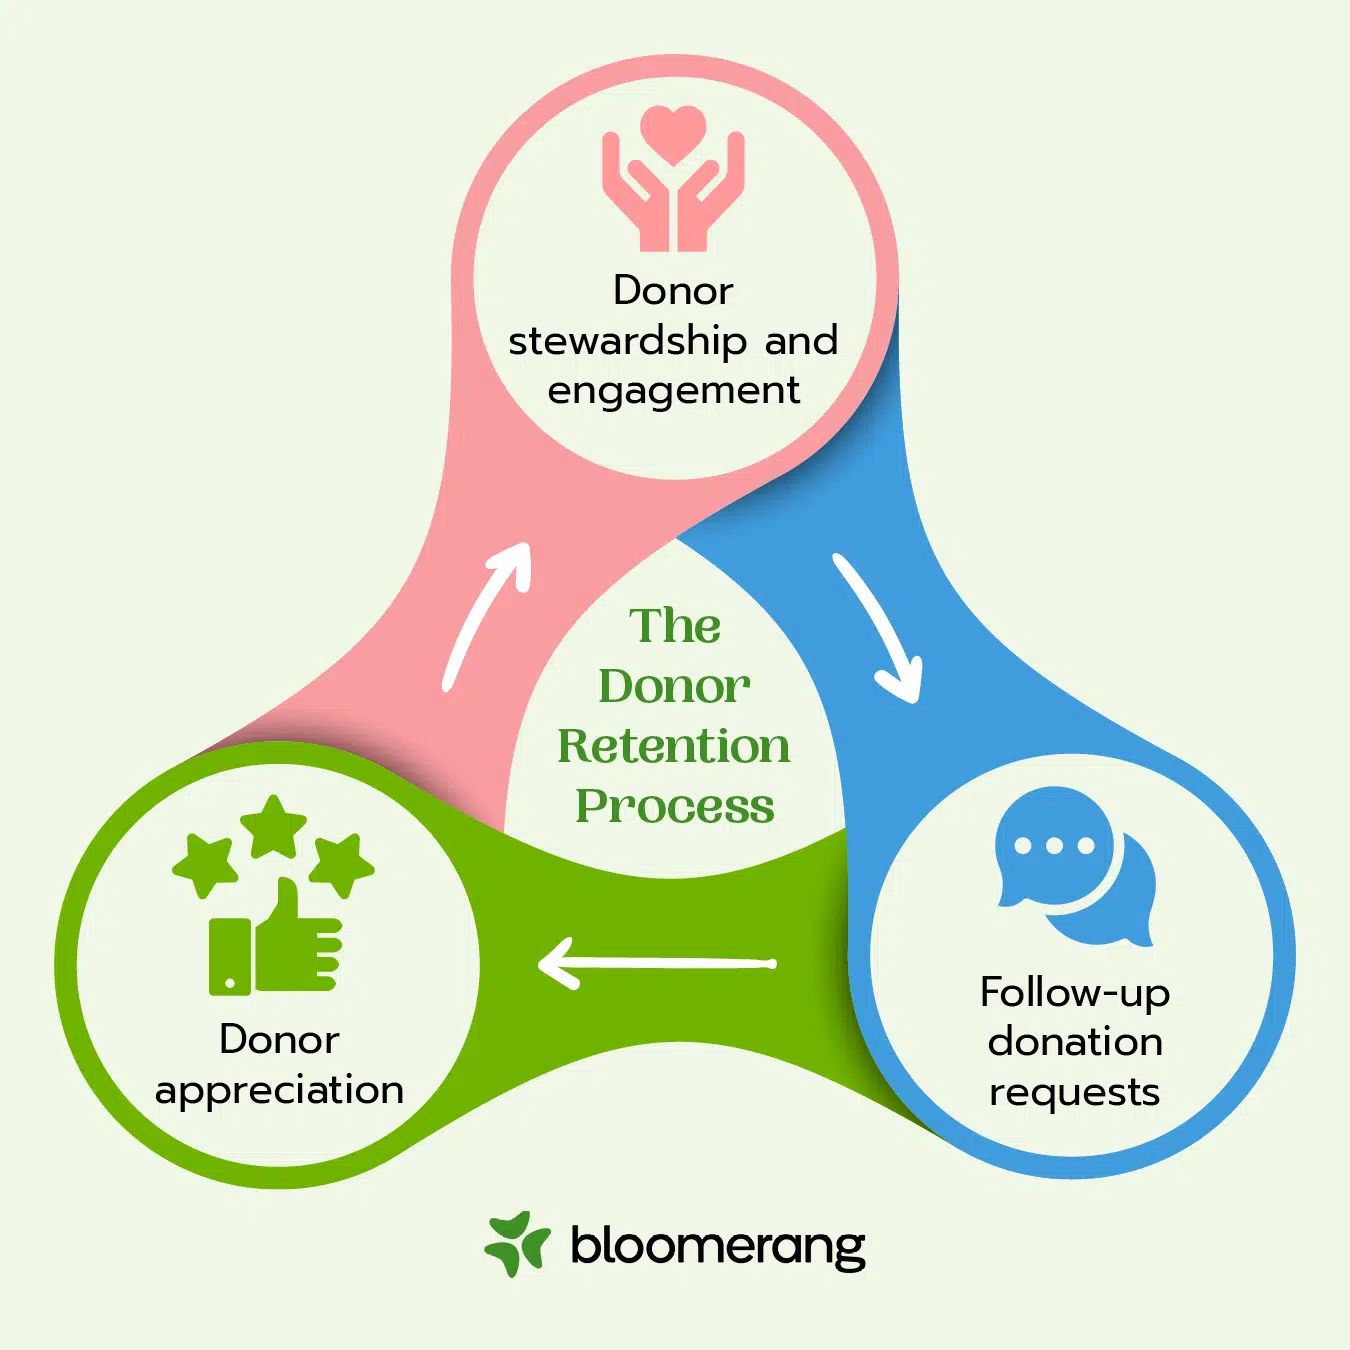 This image shows the steps of the donor retention process, a crucial aspect of donor management.